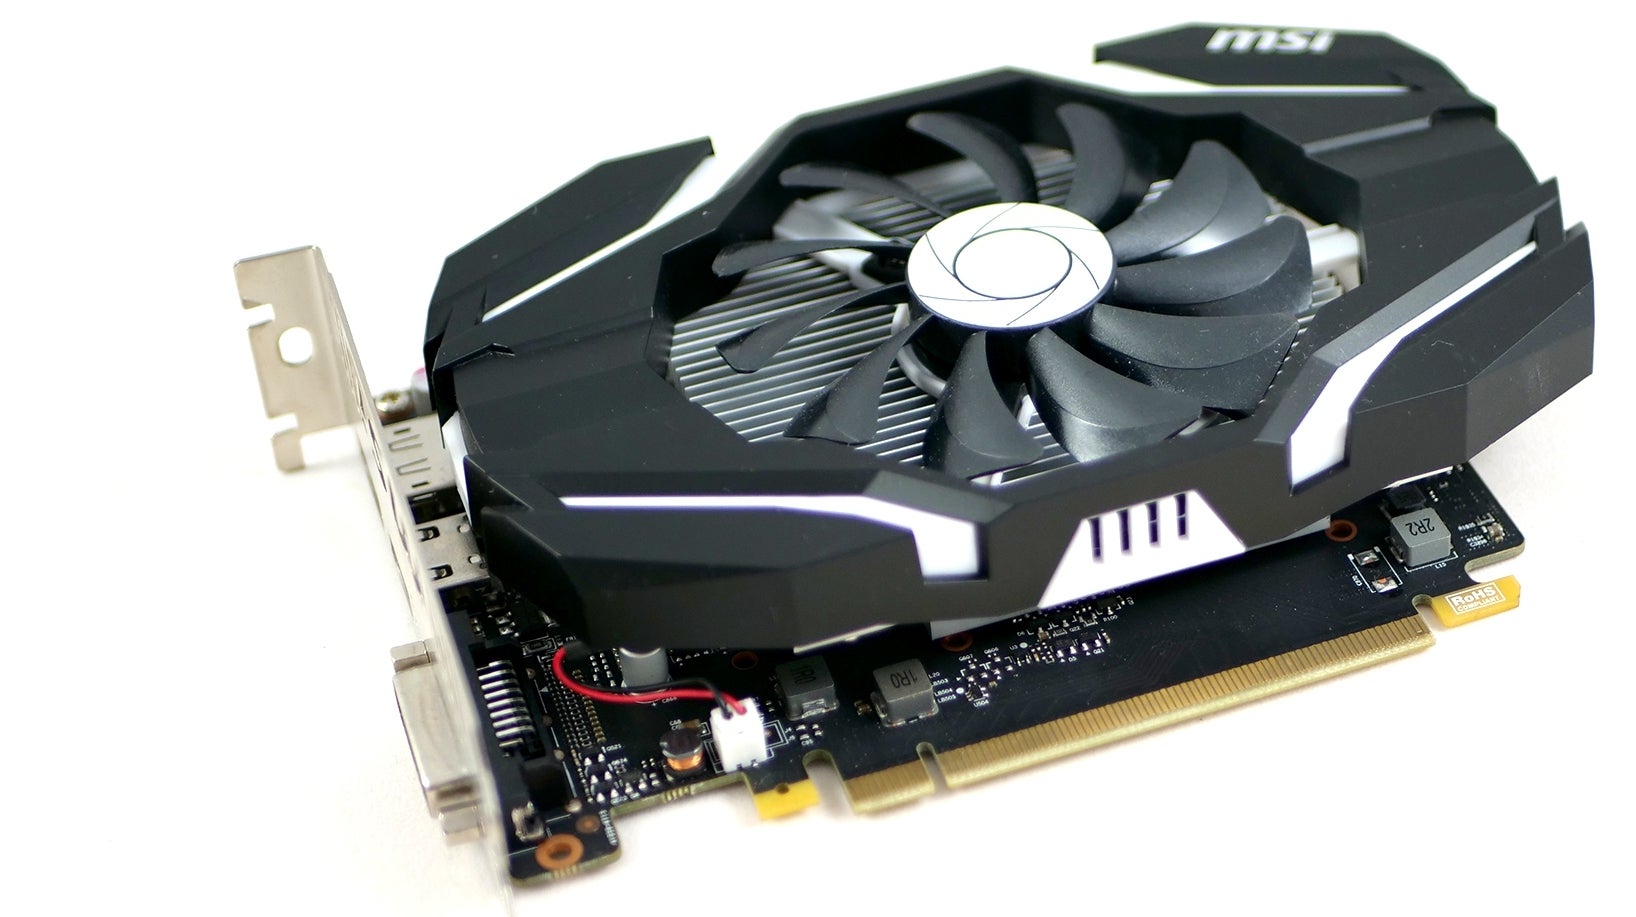 Nvidia GeForce GTX 1050 2GB benchmarks: a good budget card but it